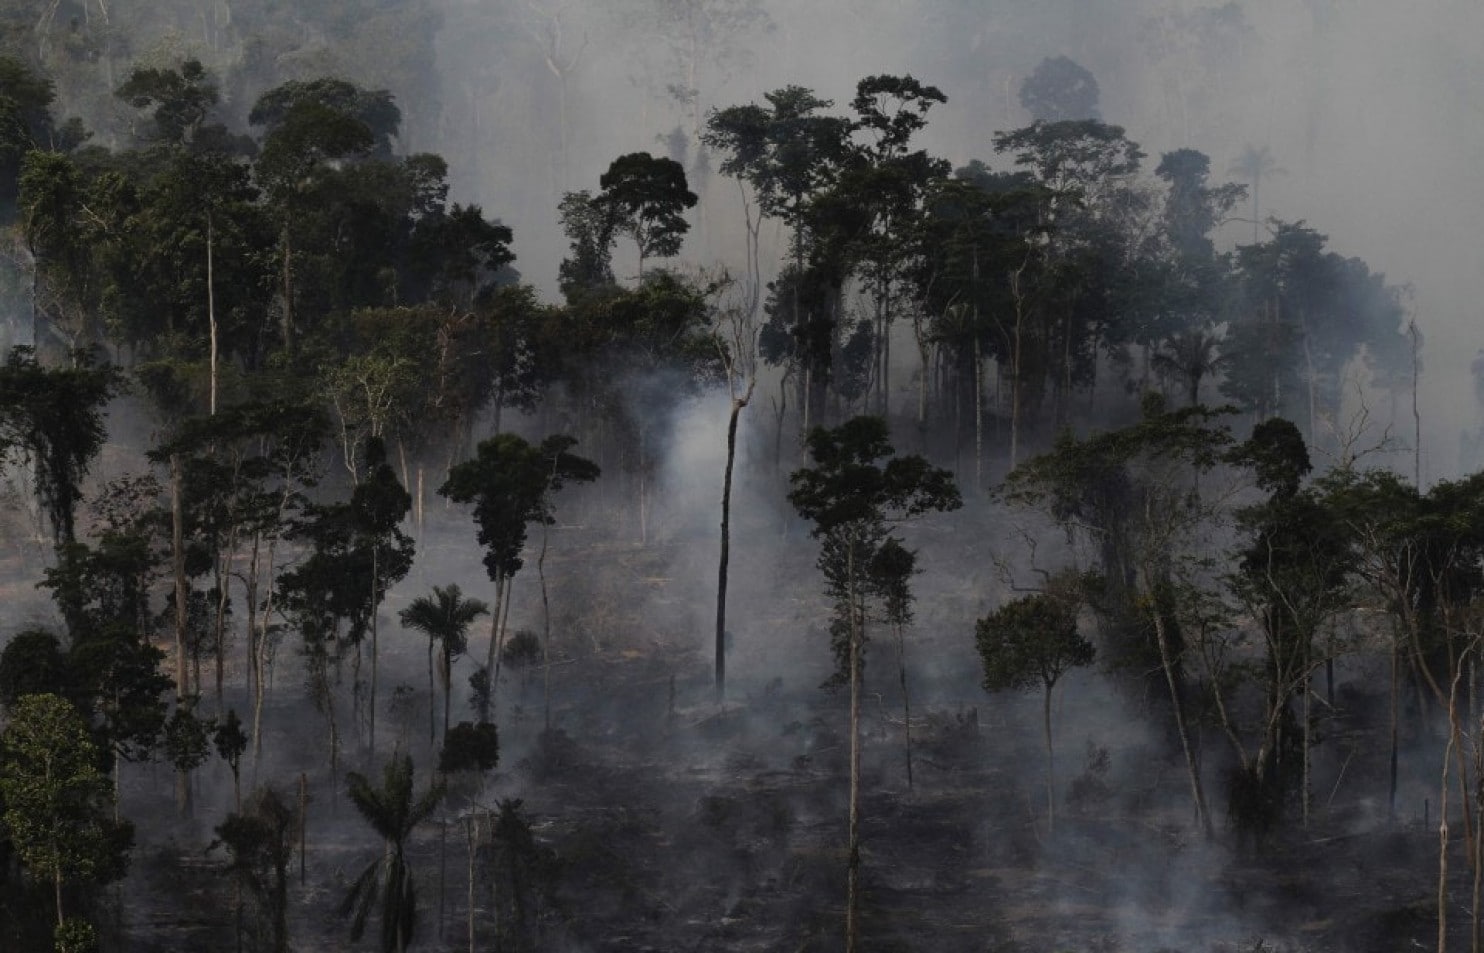 Smoke billows as an area of the Amazon rain forest is burned to clear land for agriculture on Sept. 23, 2013, near Novo Progresso, in Brazil’s Para state. (Nacho Doce/Reuters)